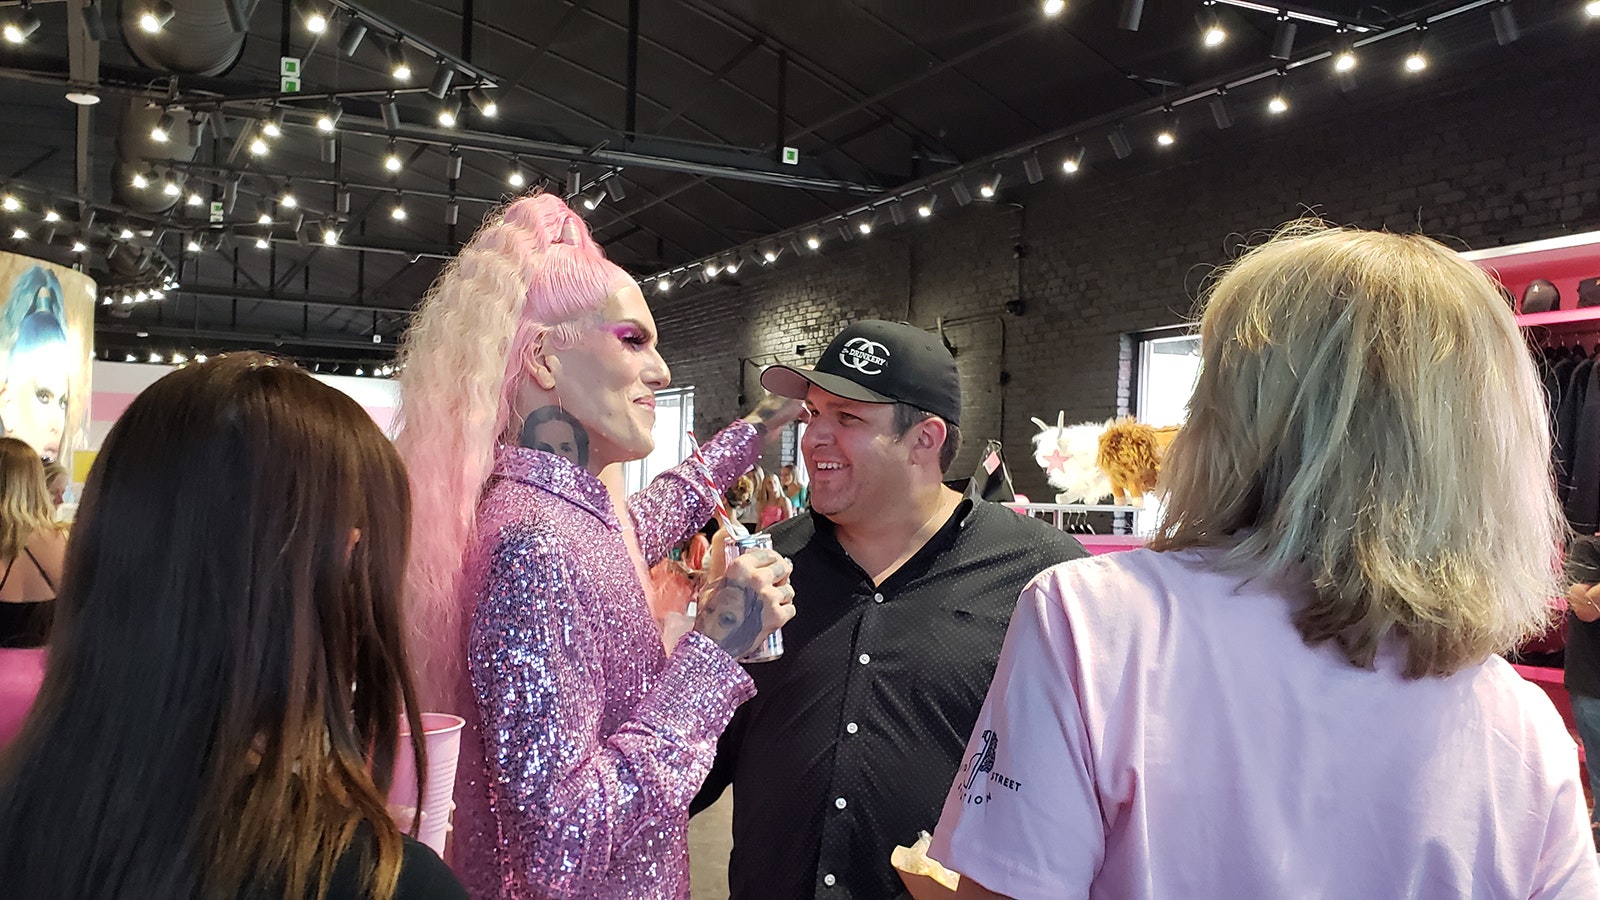 Jeffree Star hugs someone in his store while taking a break from photos with fans.